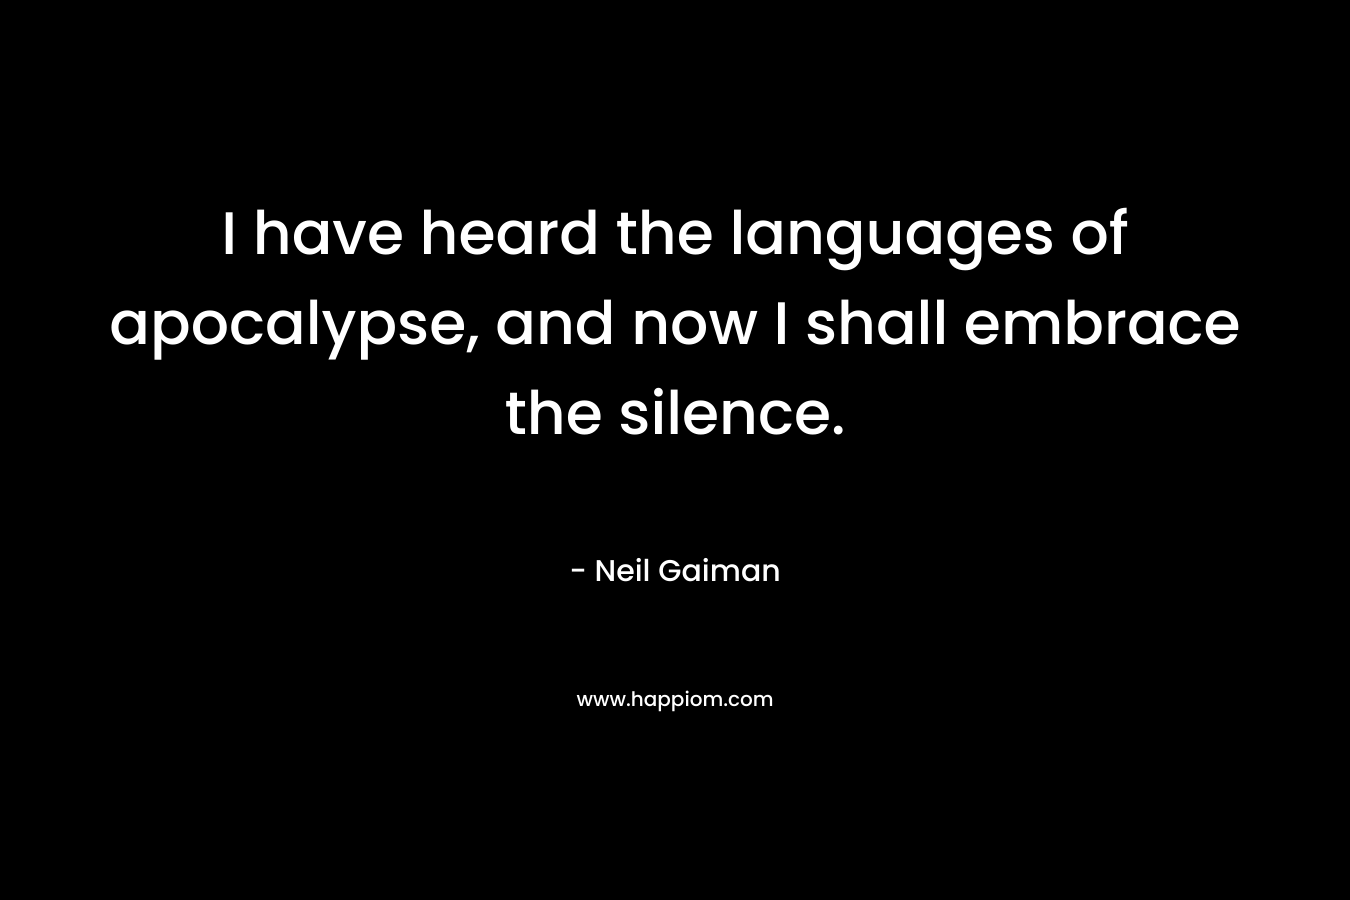 I have heard the languages of apocalypse, and now I shall embrace the silence. – Neil Gaiman